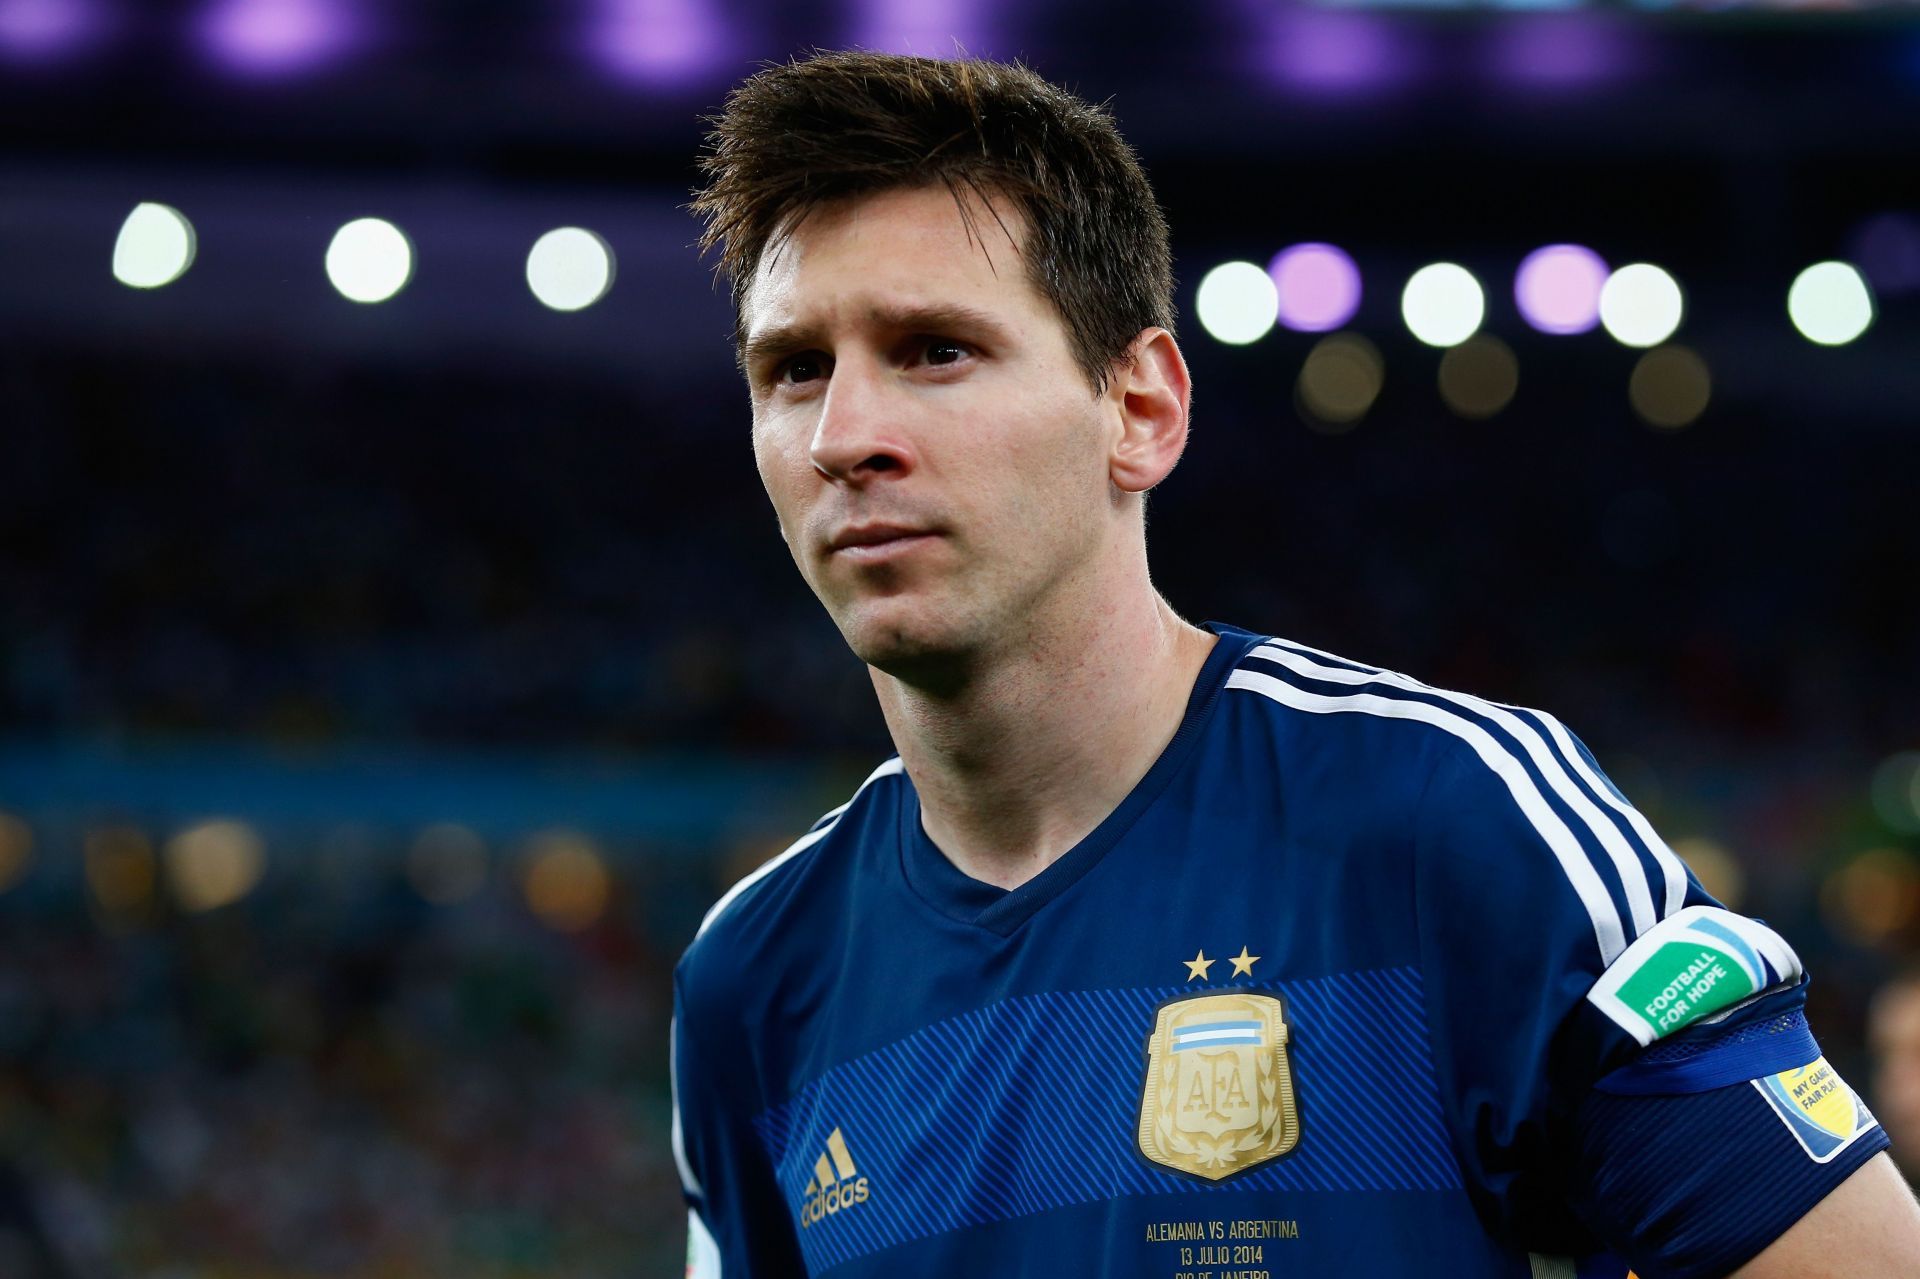 The Argentine hero missed out on World Cup glory in 2014.